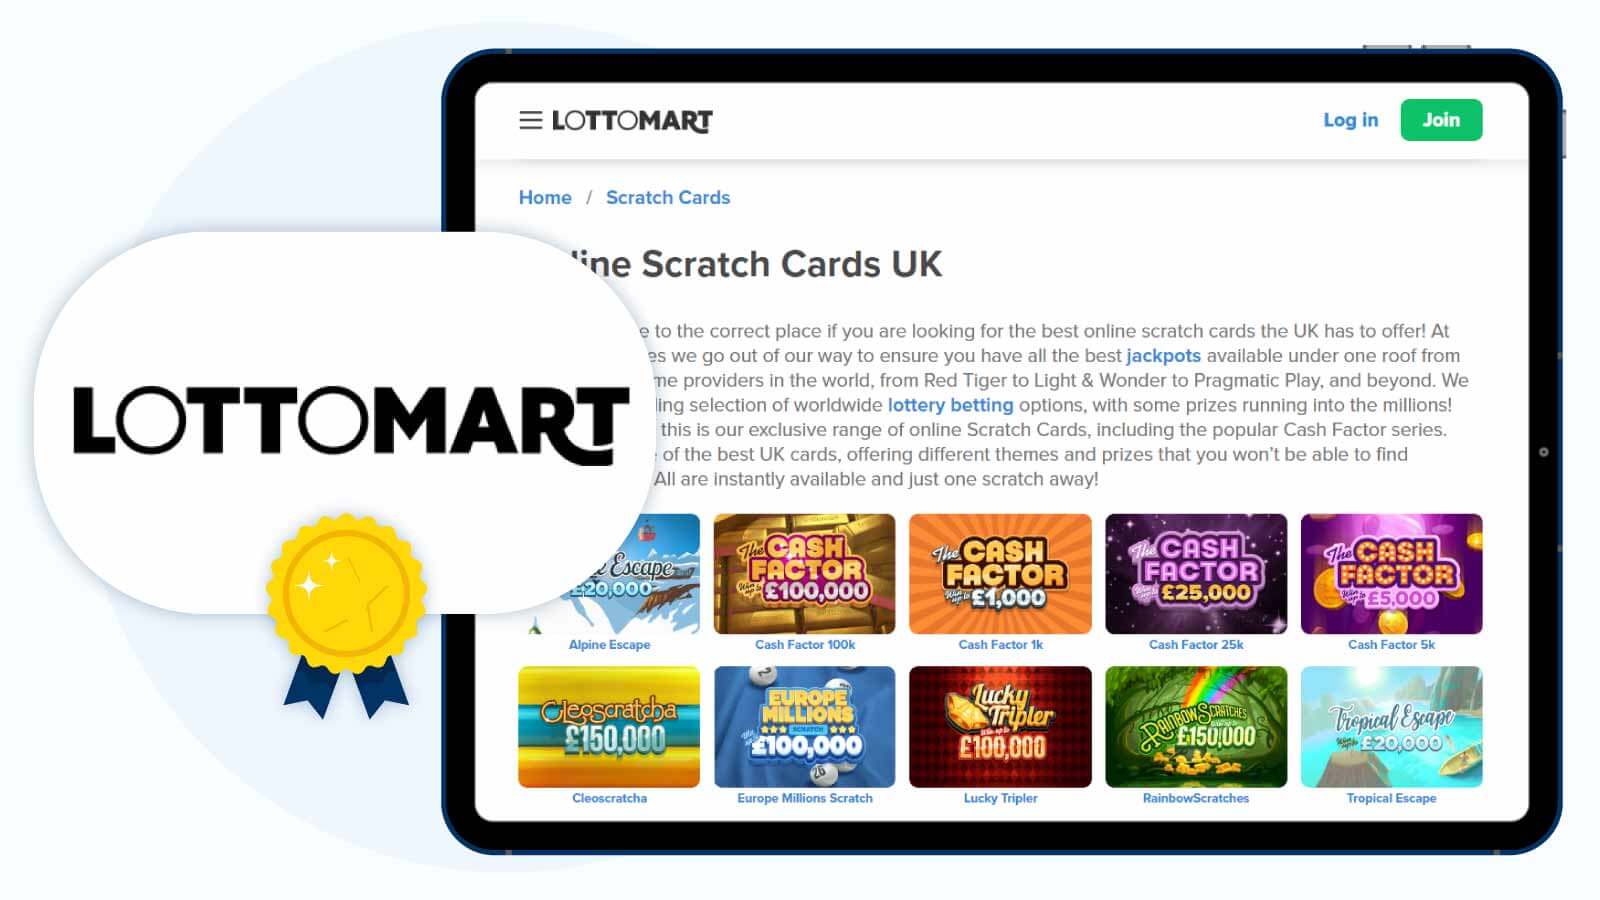 Lottomart Casino – Top Scratchcard Site in the UK